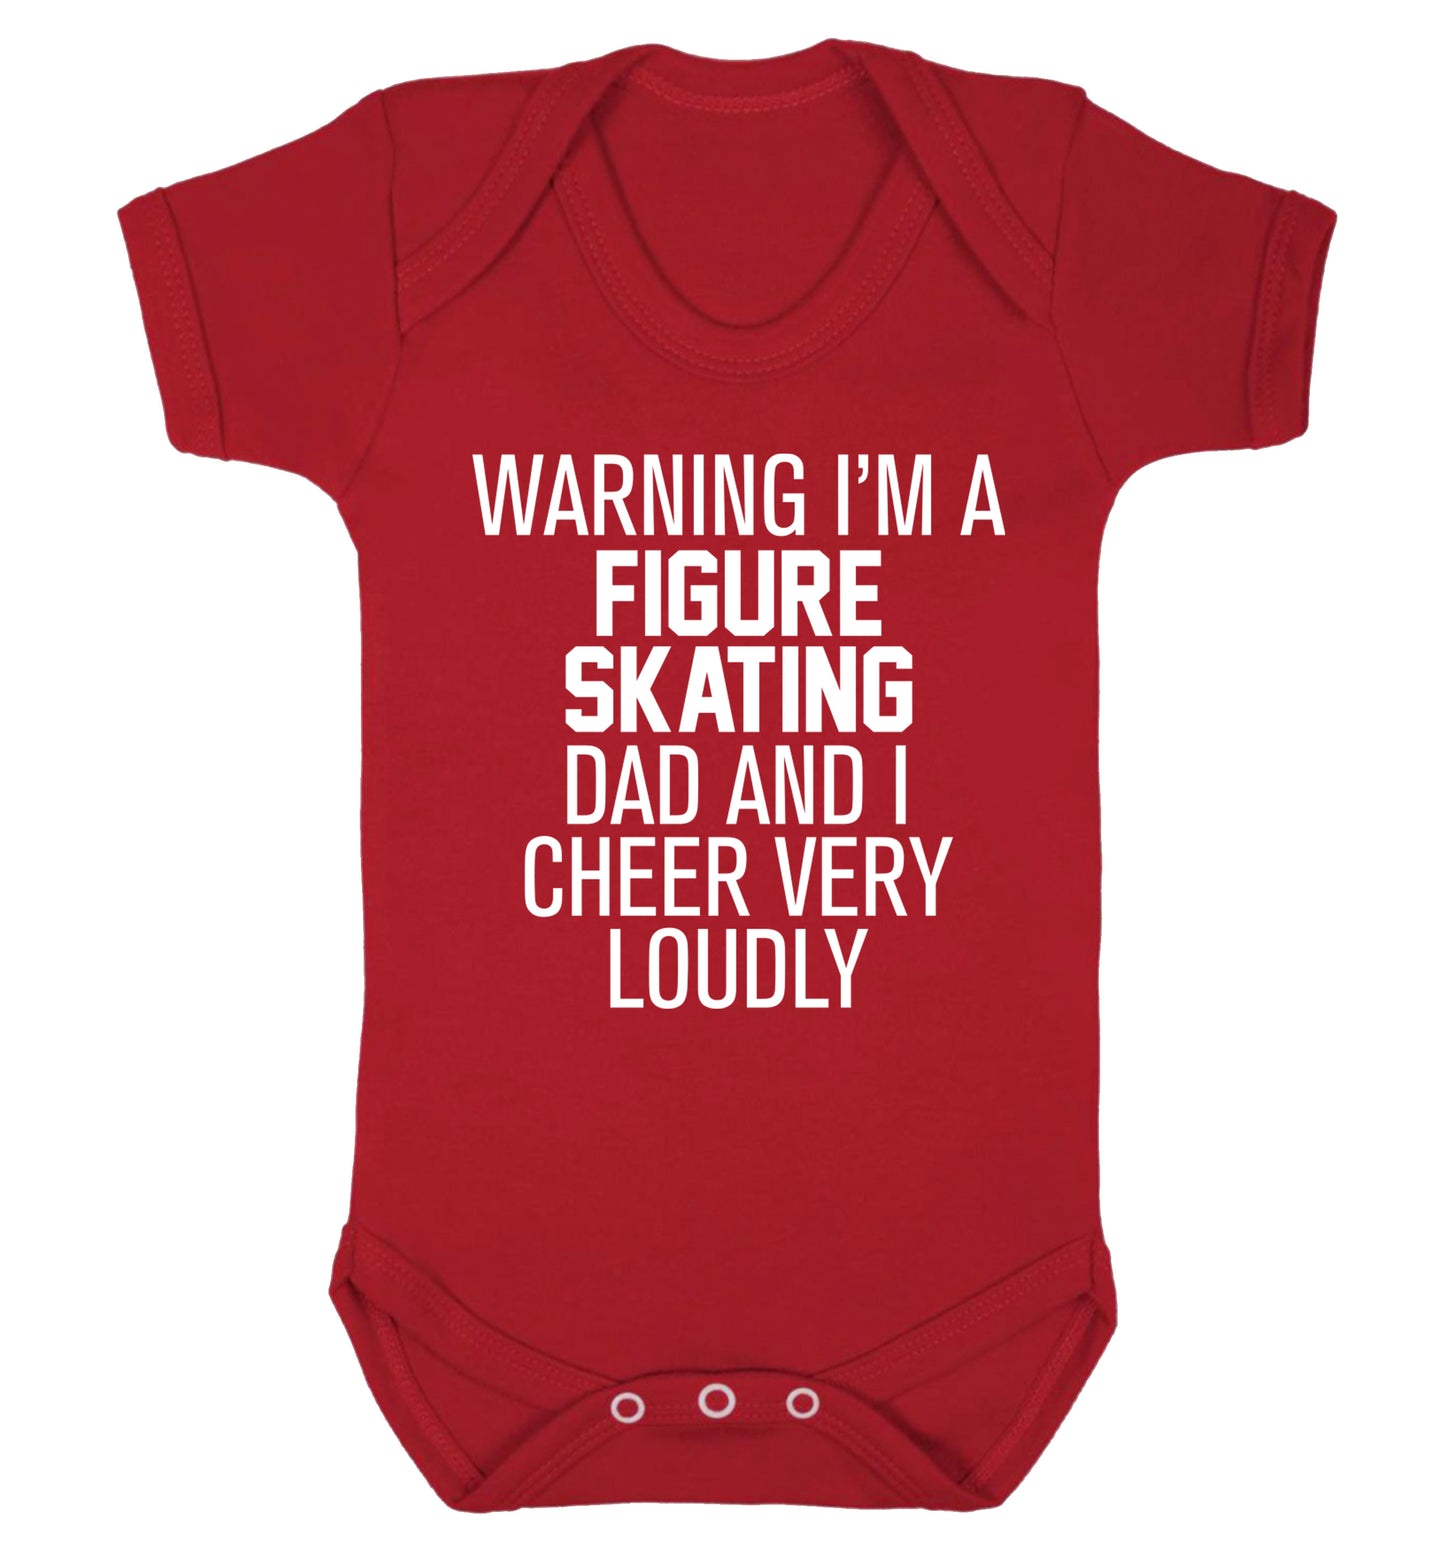 Warning I'm a figure skating dad and I cheer very loudly Baby Vest red 18-24 months